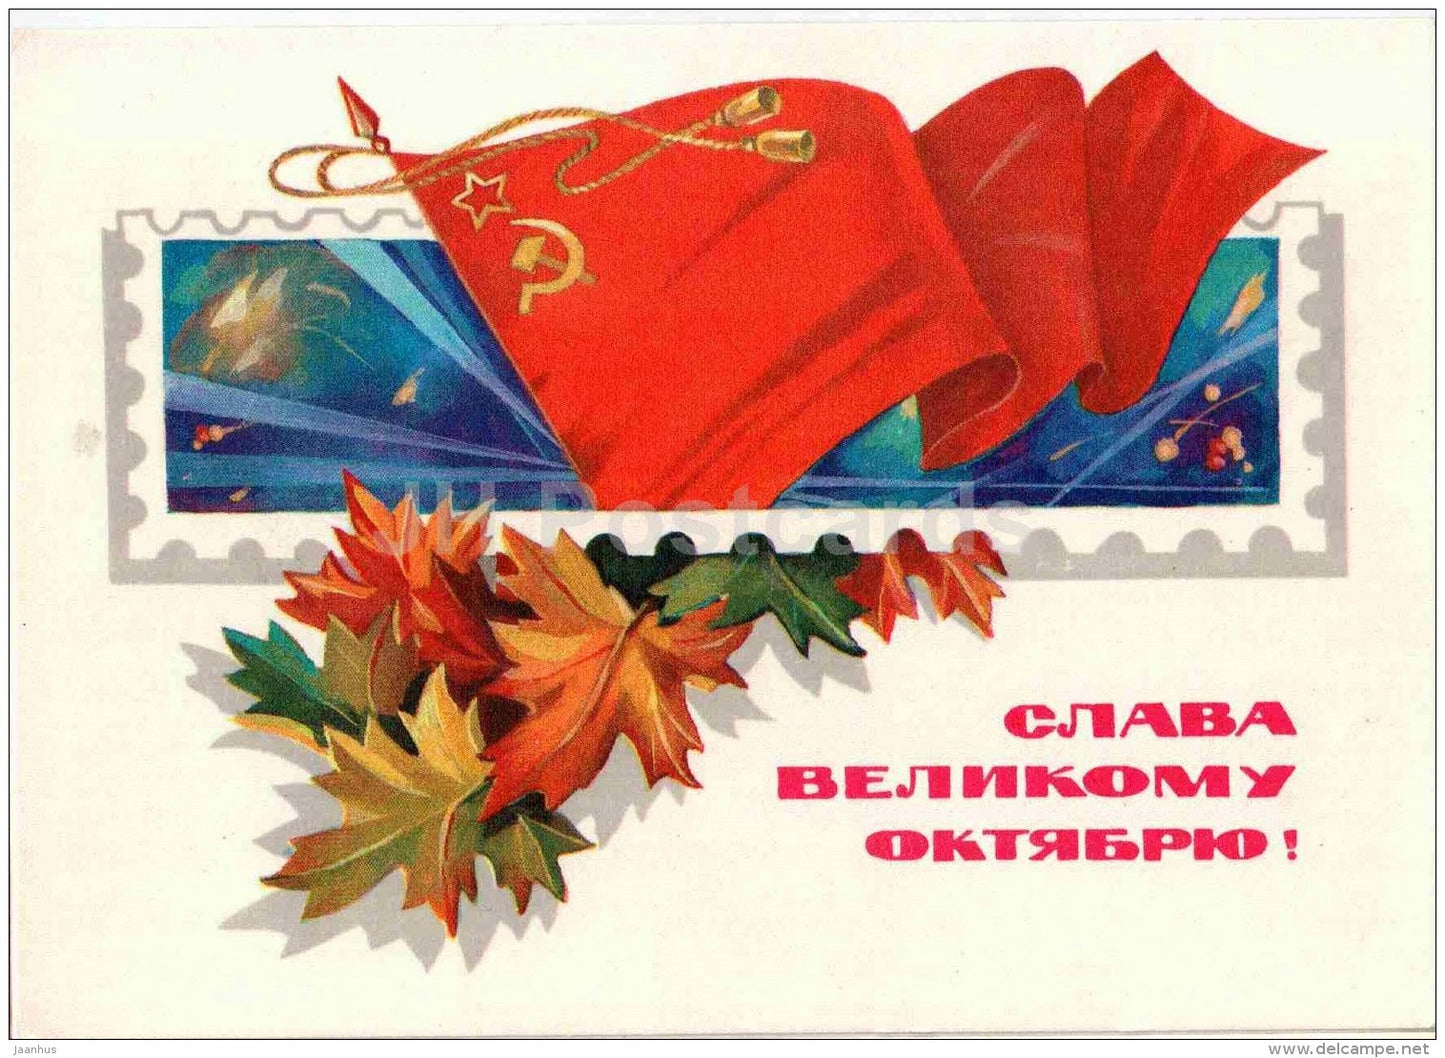 October Revolution anniversary by T. Panchenko - red flag - 1981 - Russia USSR - unused - JH Postcards